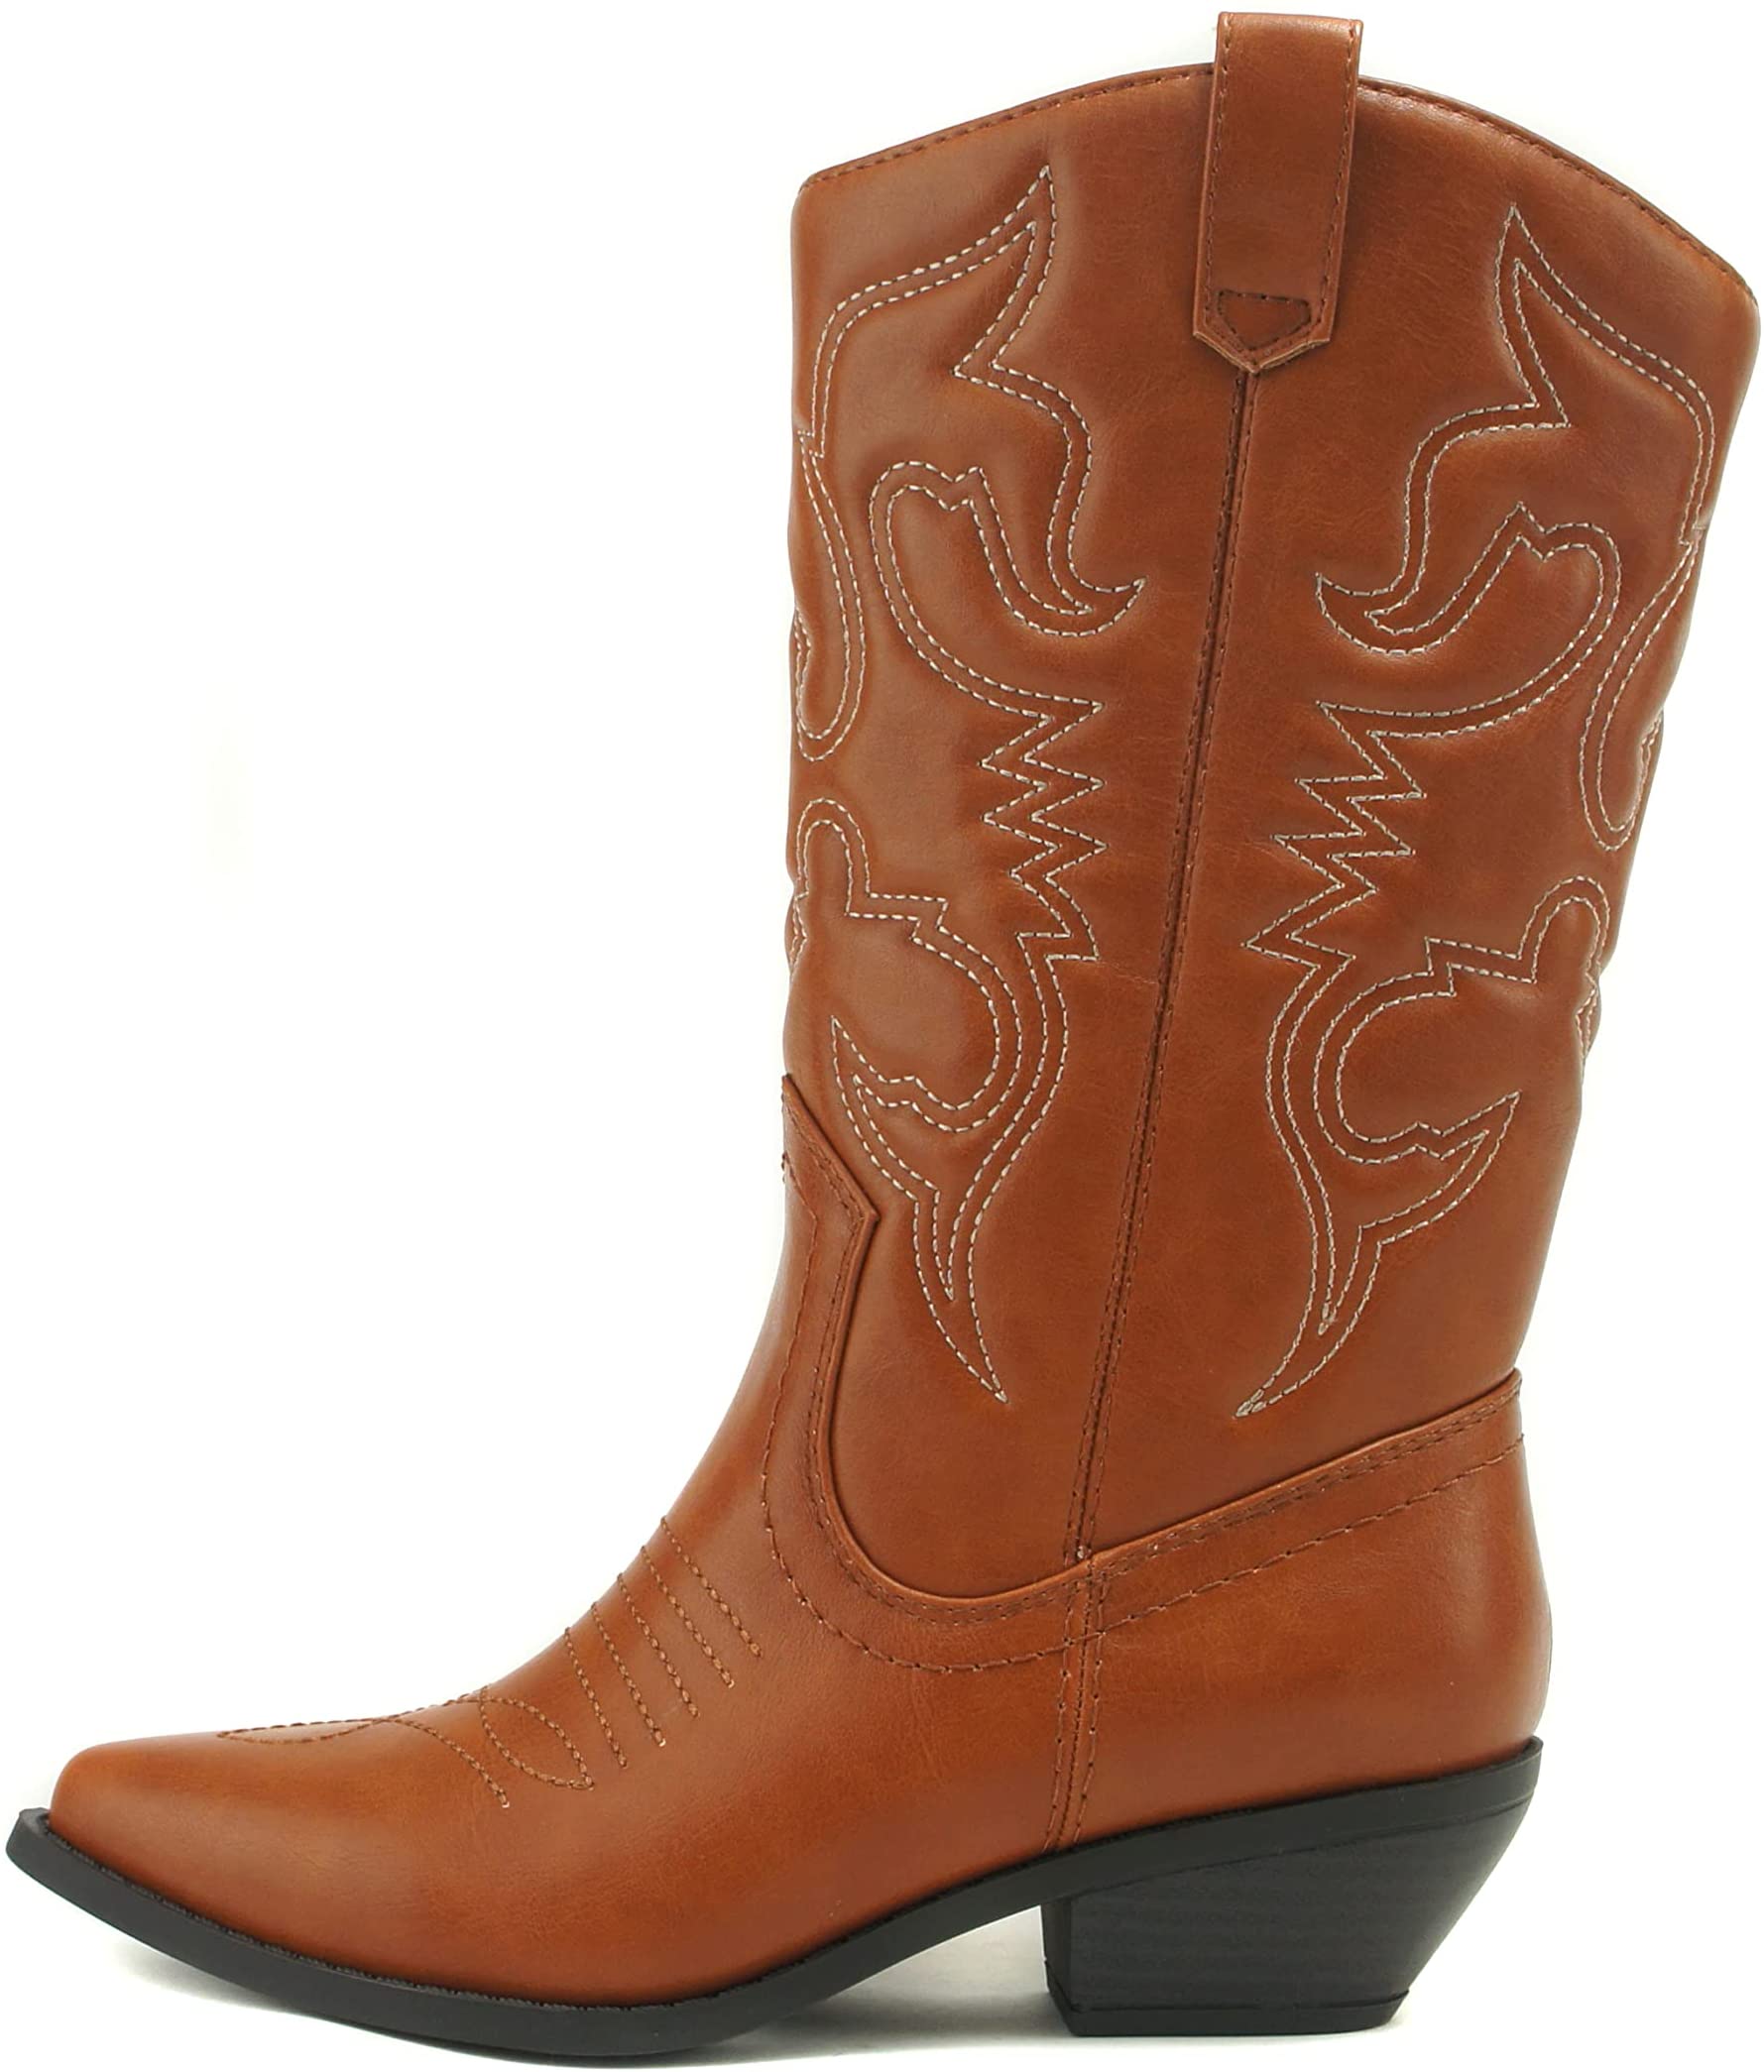 Soda Women Cowgirl Cowboy Western Stitched Boots Pointy Toe Knee High Reno-S Cognac Tan Light Brown 7.5 - image 2 of 4